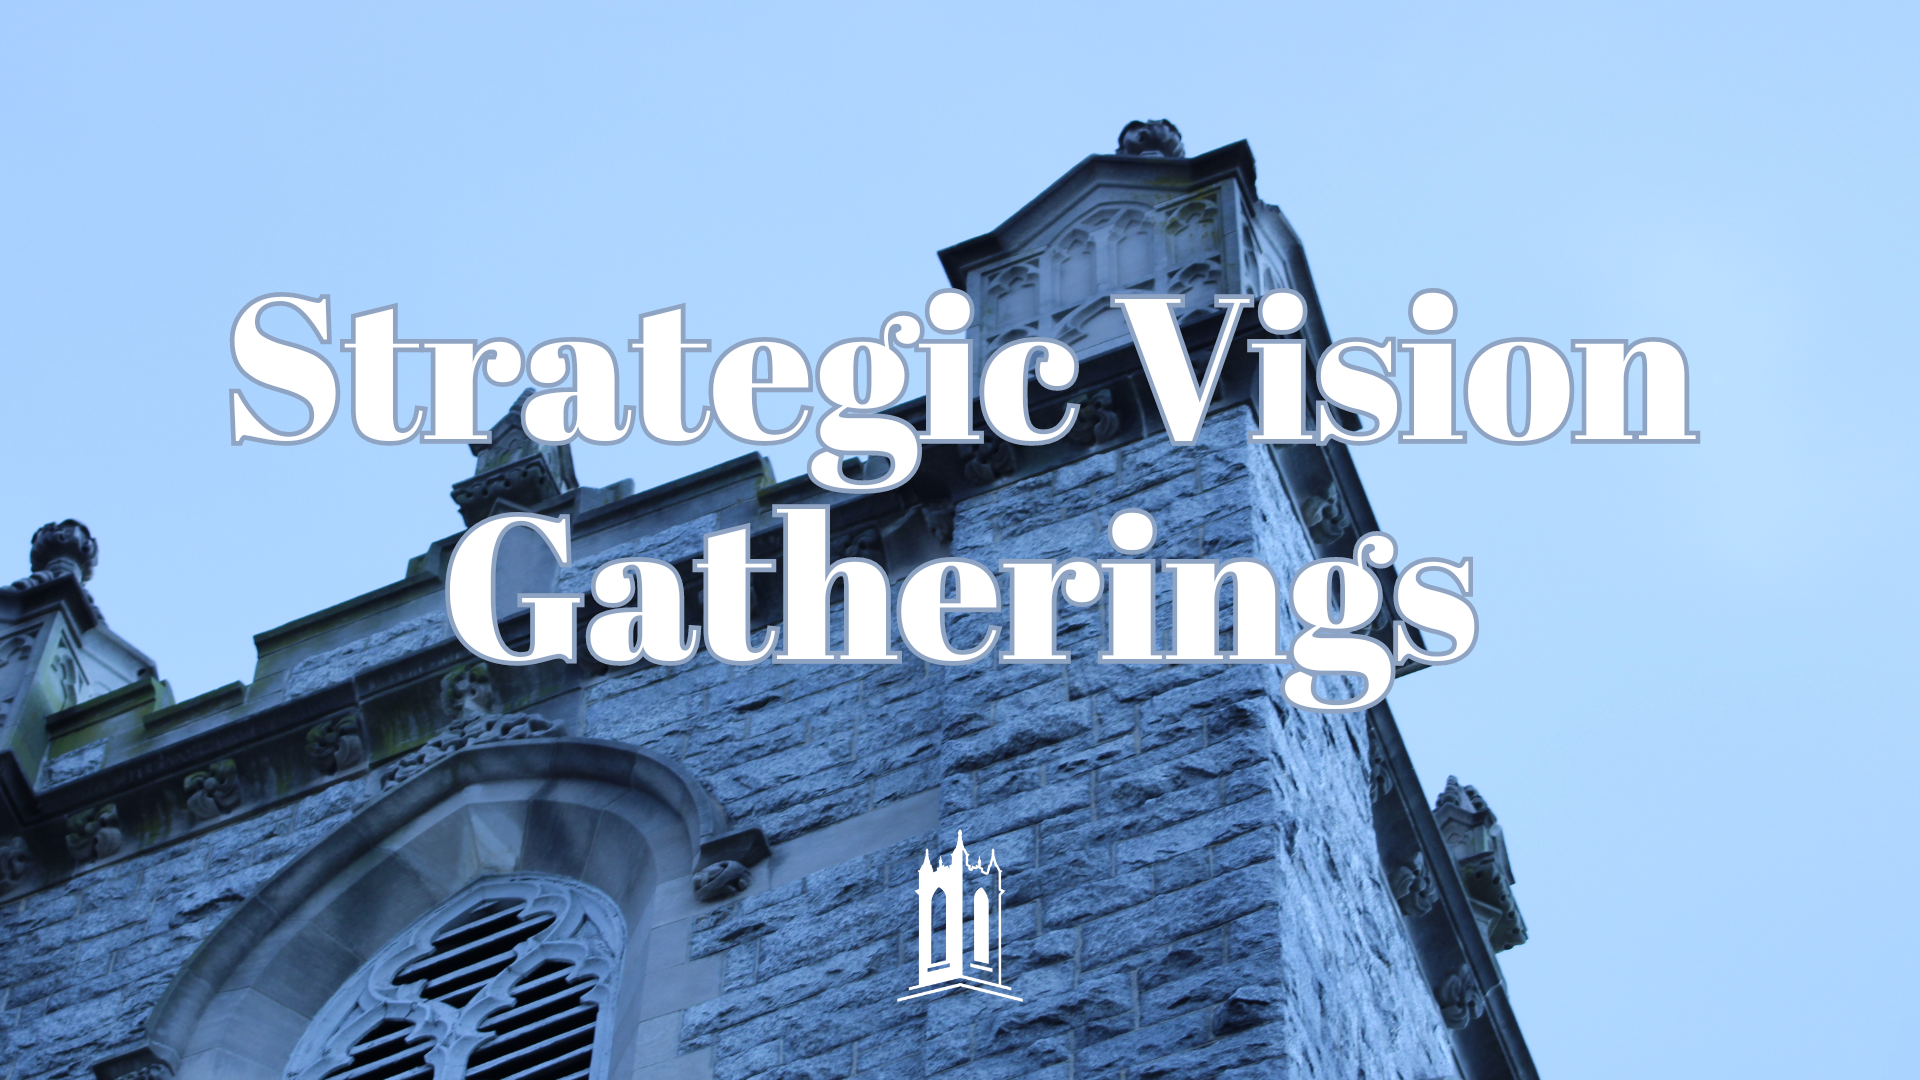 Strategic Vision Gathering: Northwest D.C., facilitated by Cara Crumpler at the home of Doug Barker and Sam Kilpatrick